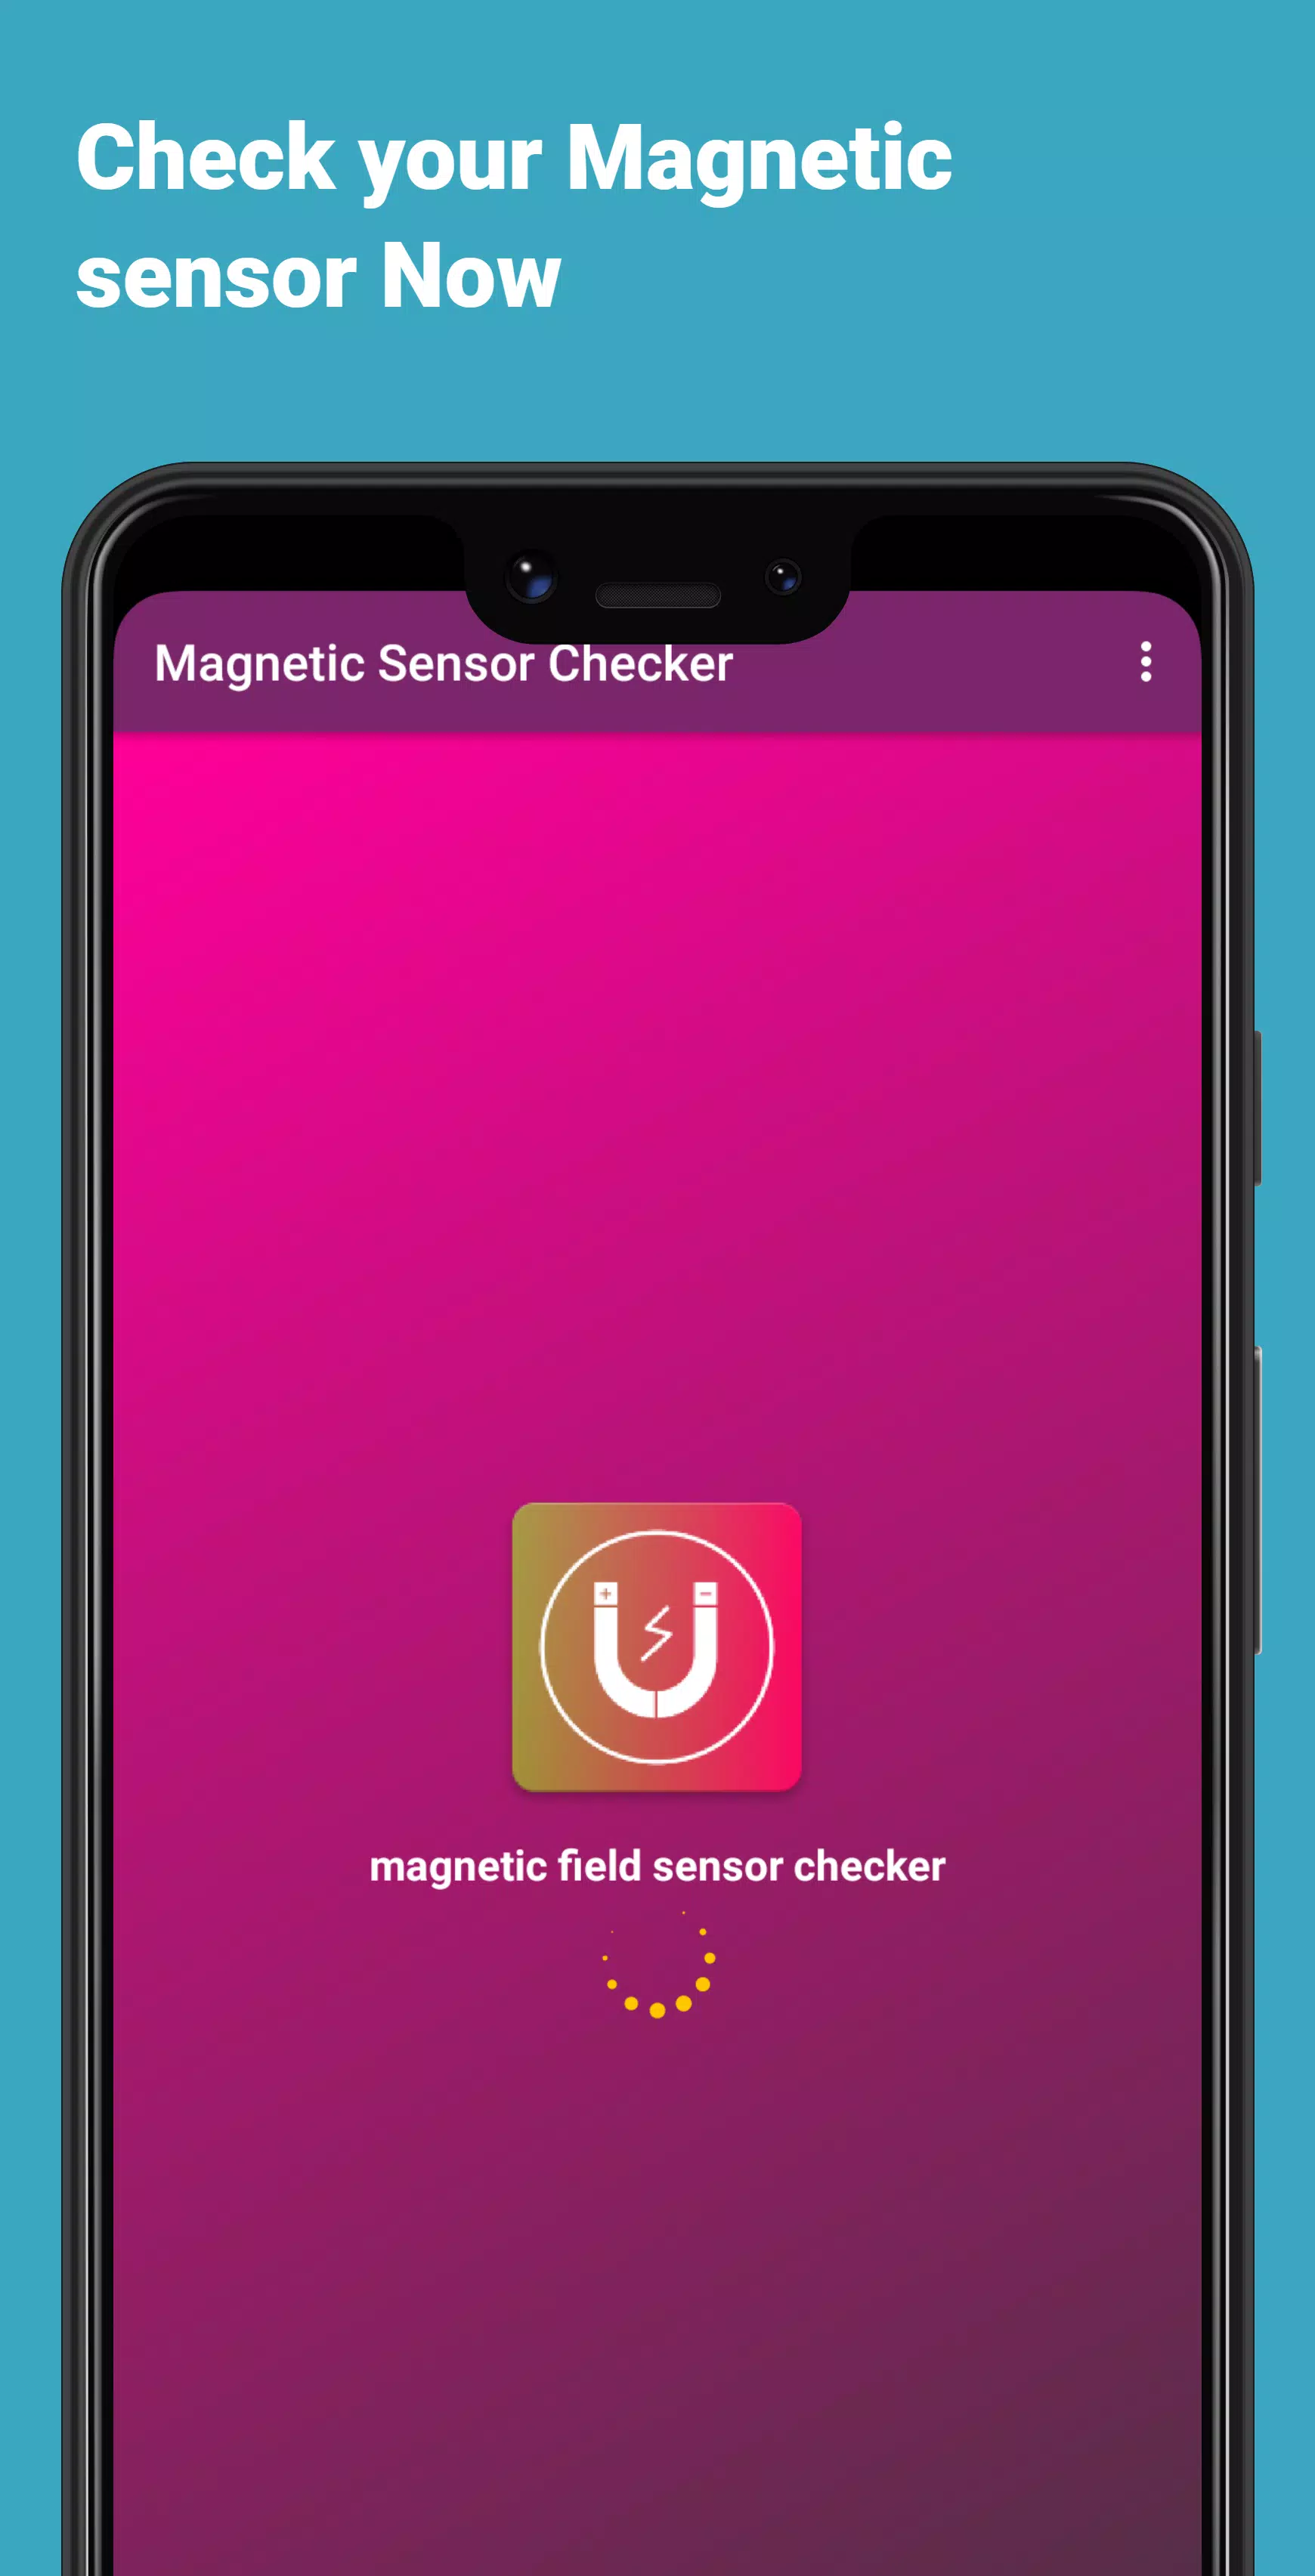 Magnetic Sensor Checker for Android - APK Download